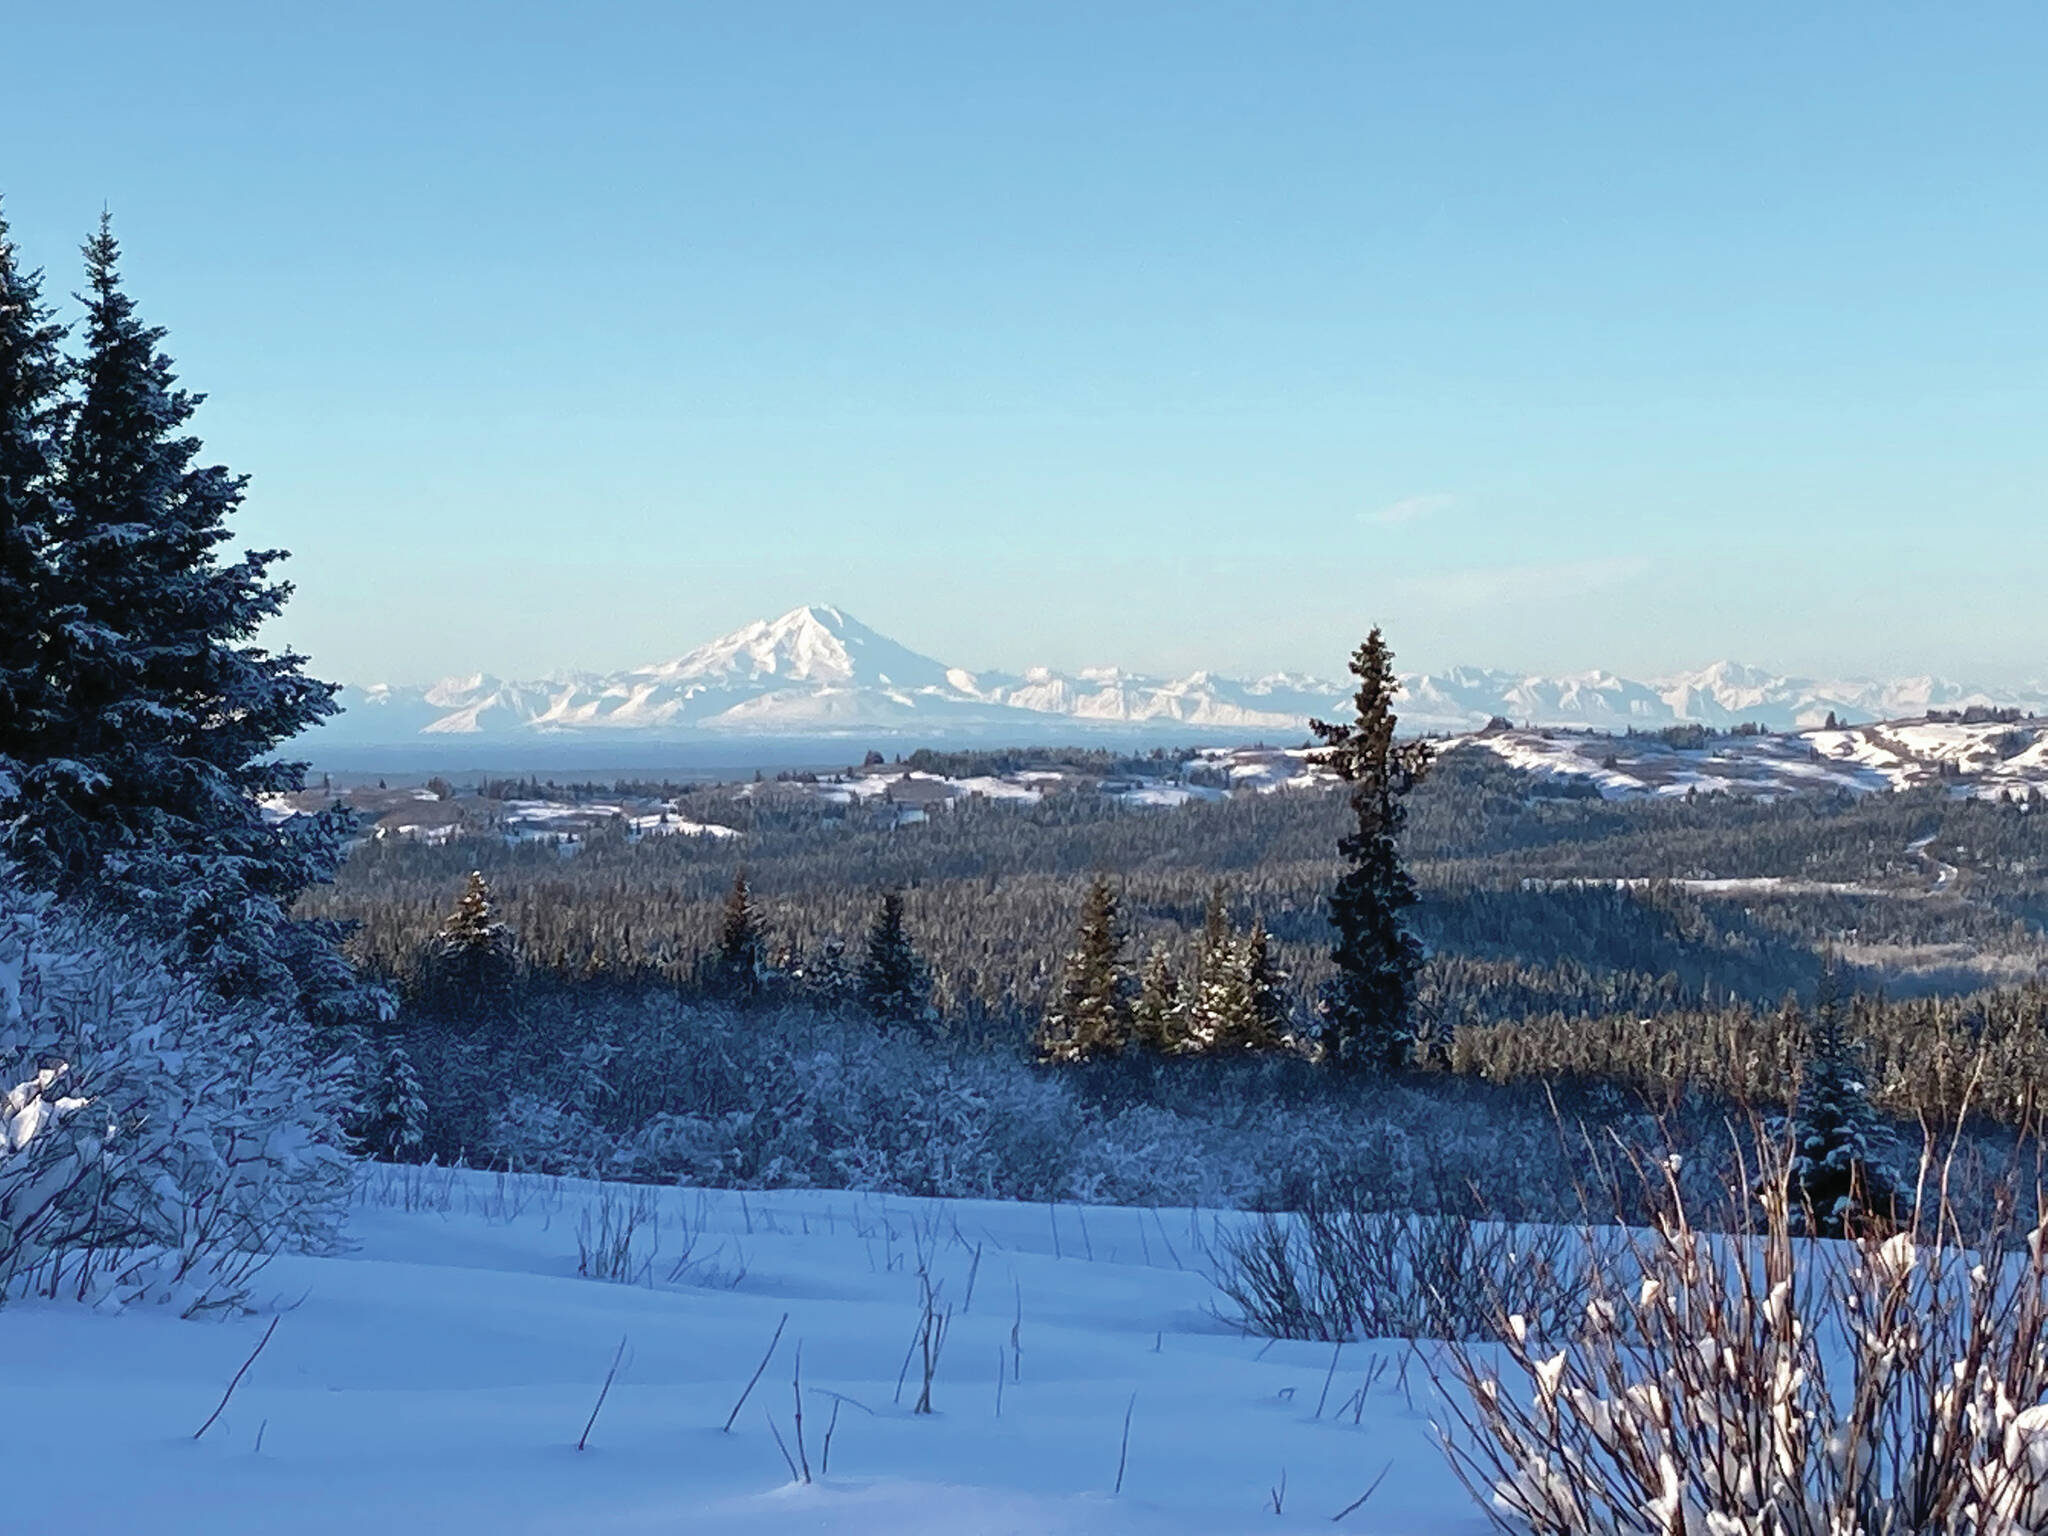 Mt. Redoubt can be seen across Cook Inlet from Diamond Ridge on the Marathon Ski Trail on Sunday, Jan. 24, 2021, near Homer, Alaska. (Photo by Michael Armstrong/Homer News)